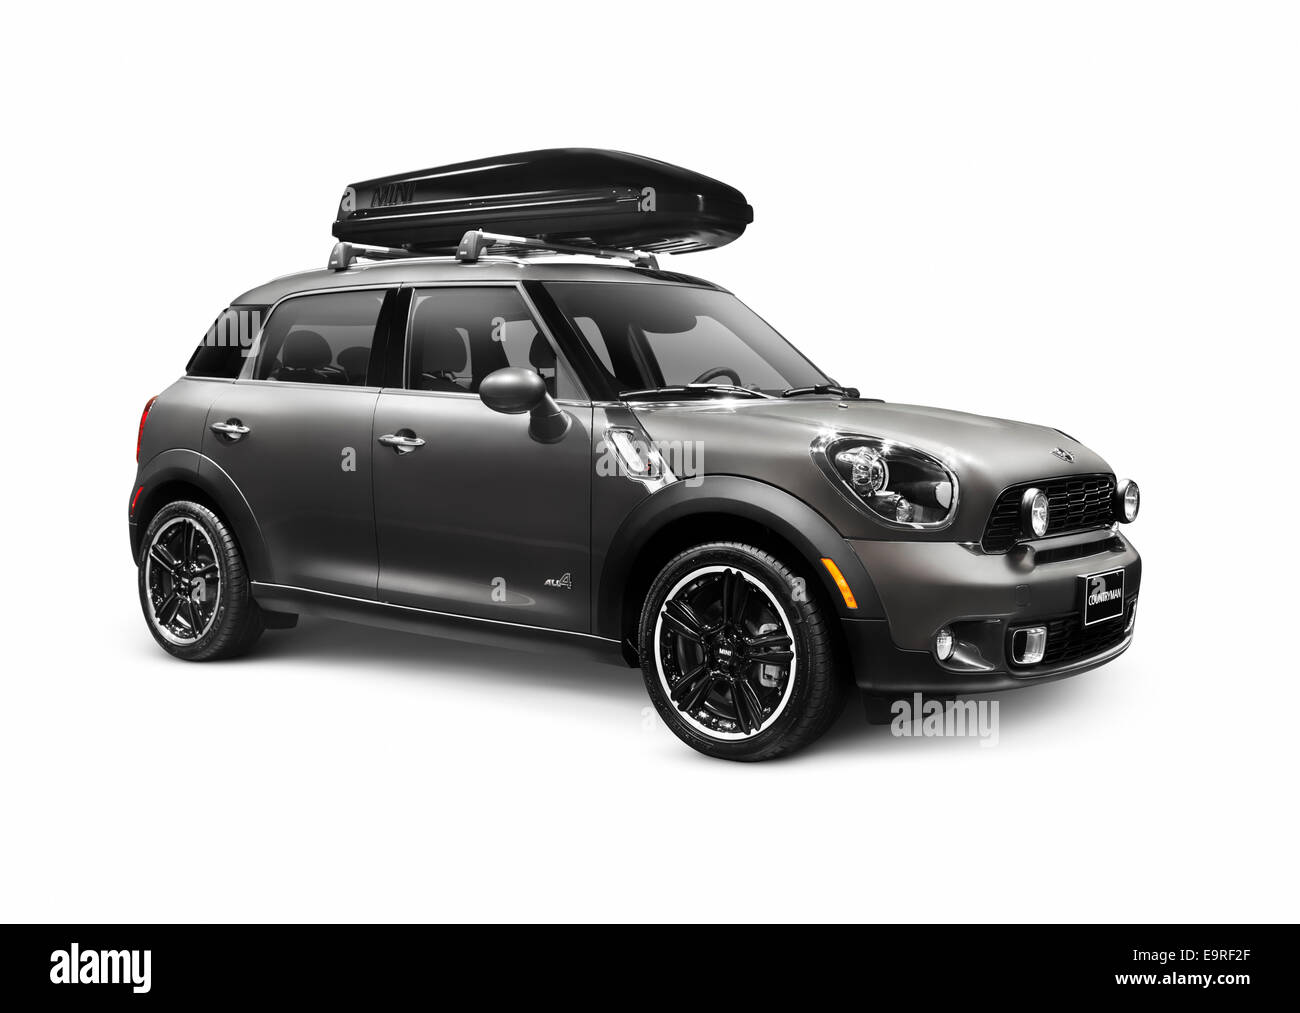 License available at MaximImages.com - Gray 2014 Mini Cooper Countryman compact CUV car with a cargo roof box isolated on white background Stock Photo